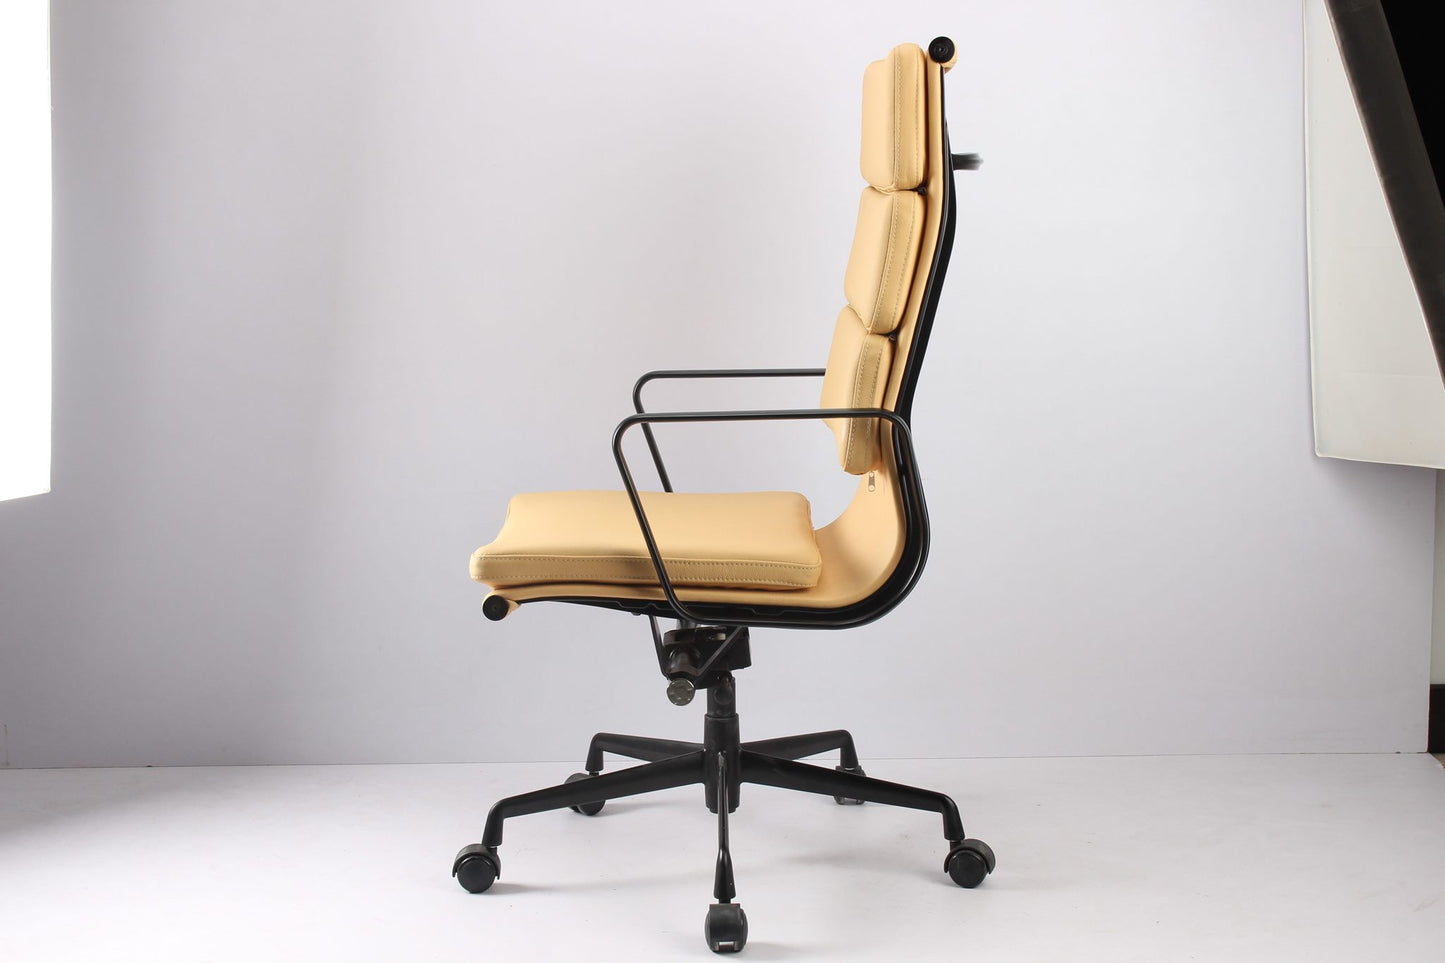 RP Genuine Leather Eames Soft Pad high back Office Chair, Beige color in stock